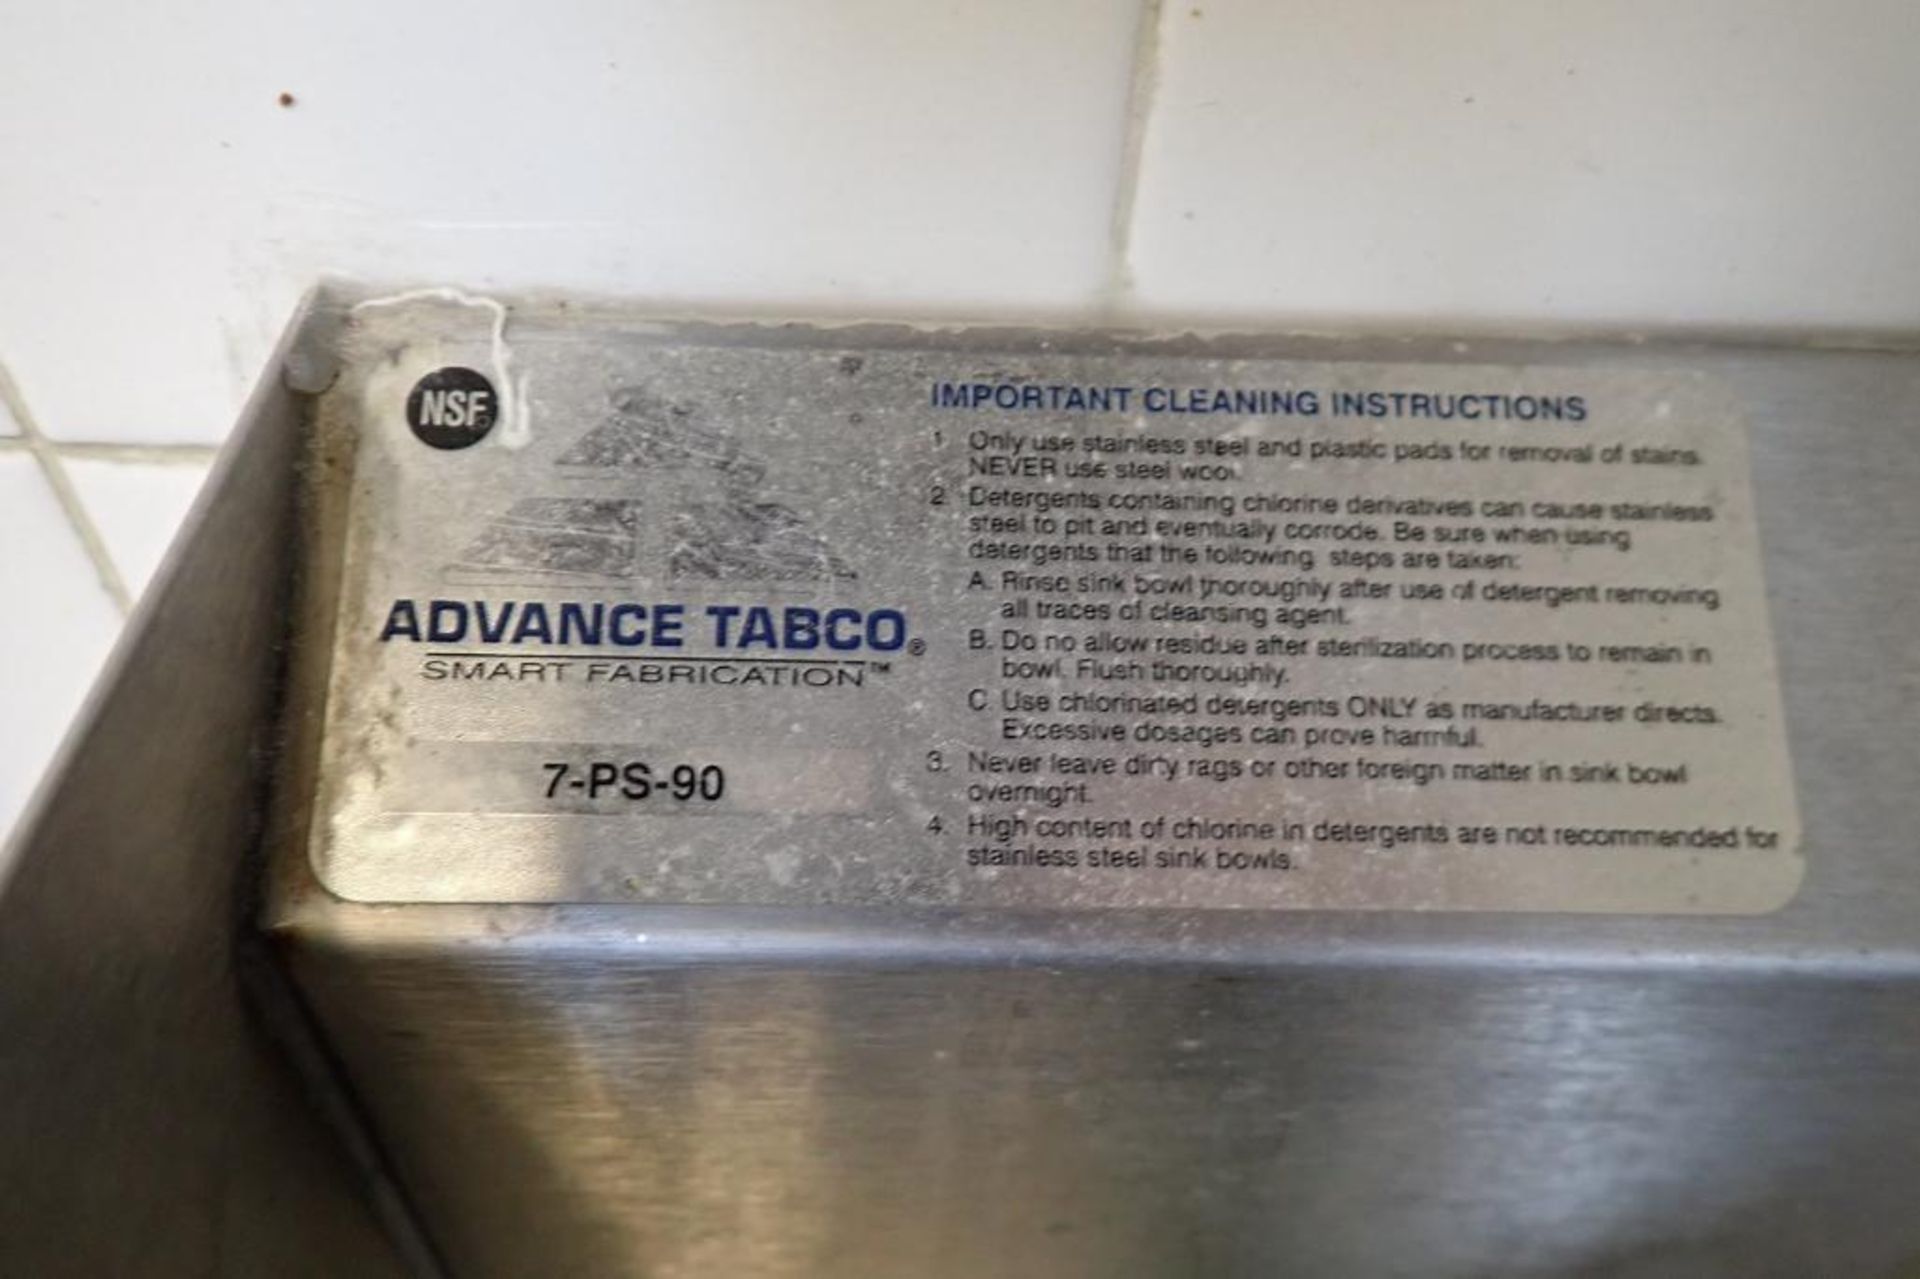 Advance Tabco SS foot operated sink, 17 in. wide x 16 in. deep x 42 in. tall, Model 7-PS-90 - Image 4 of 4